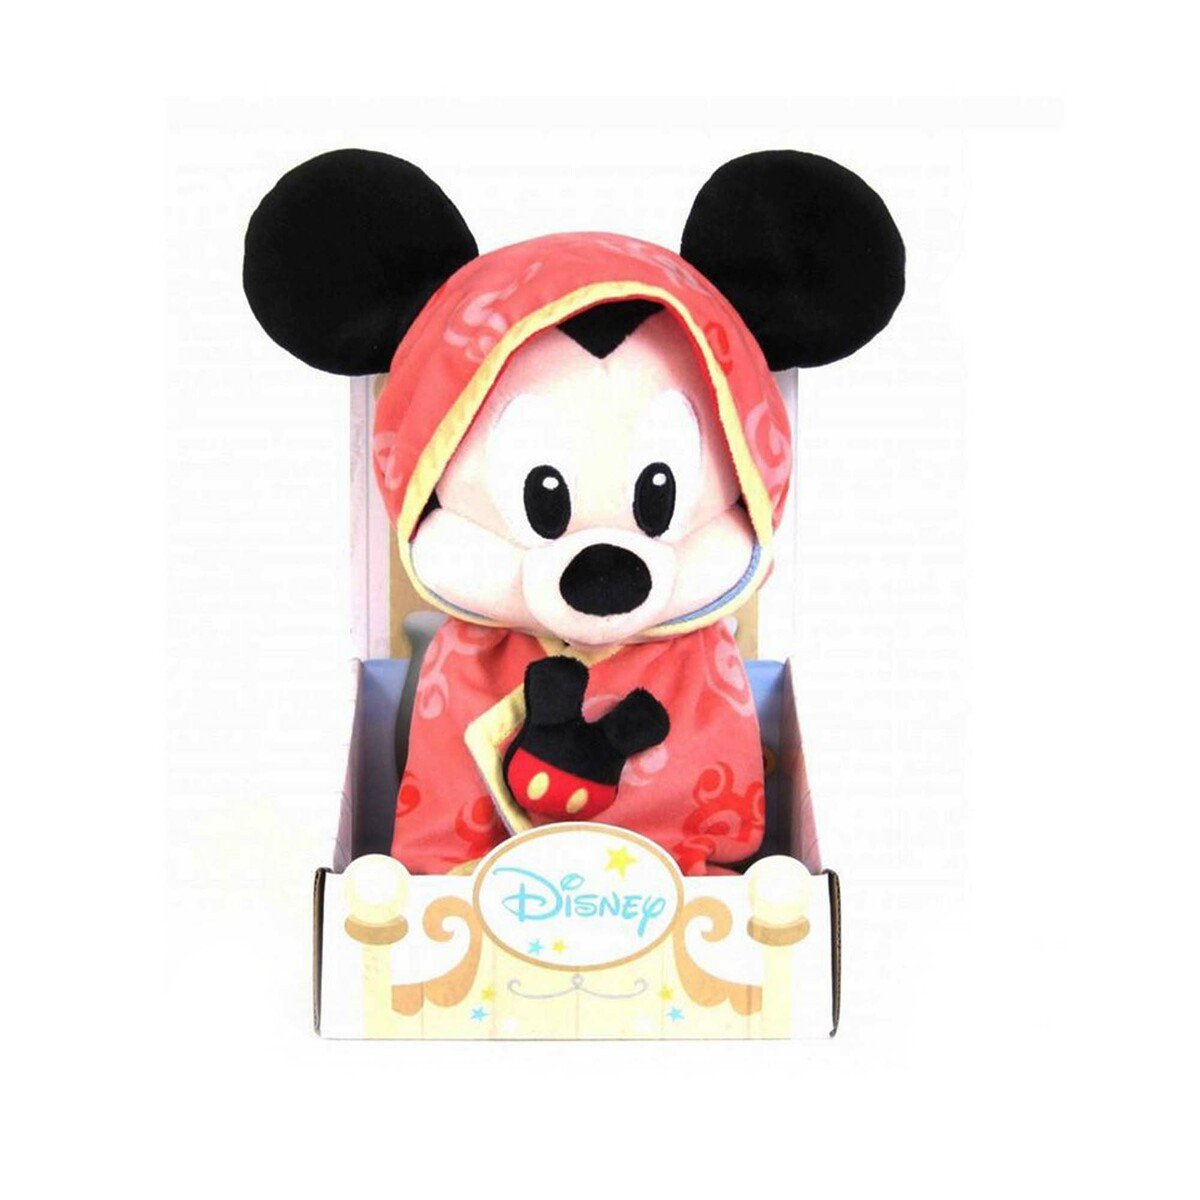 Disney Plush Mickey Blankee With Stand 10" PDP1601598